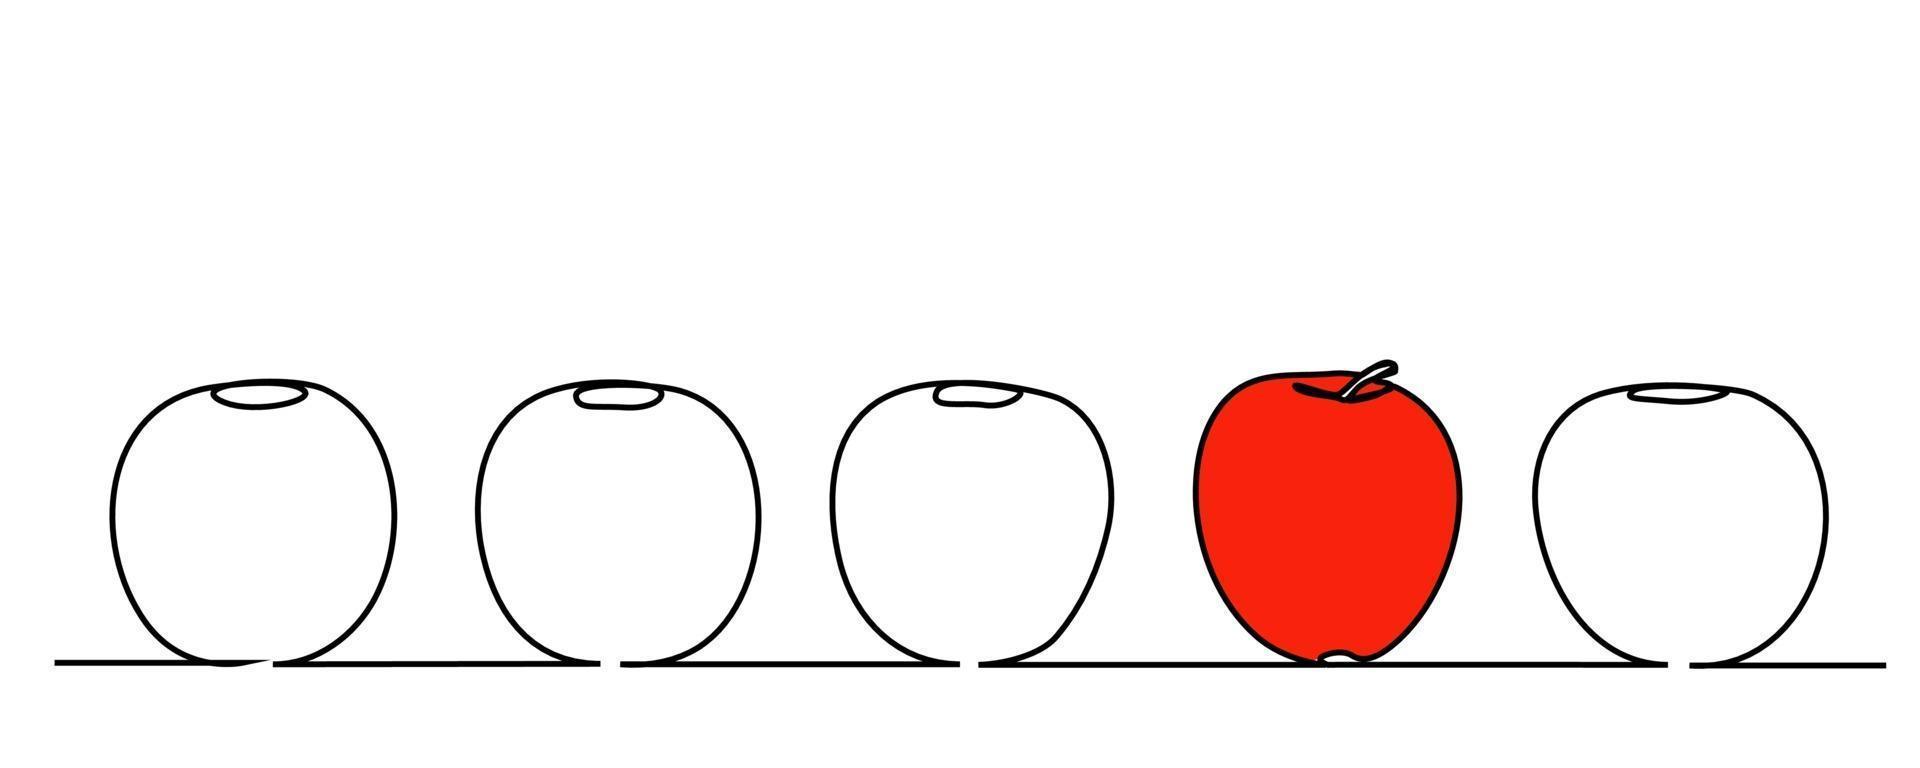 Red Apple icon, one line drawing, isolated vector